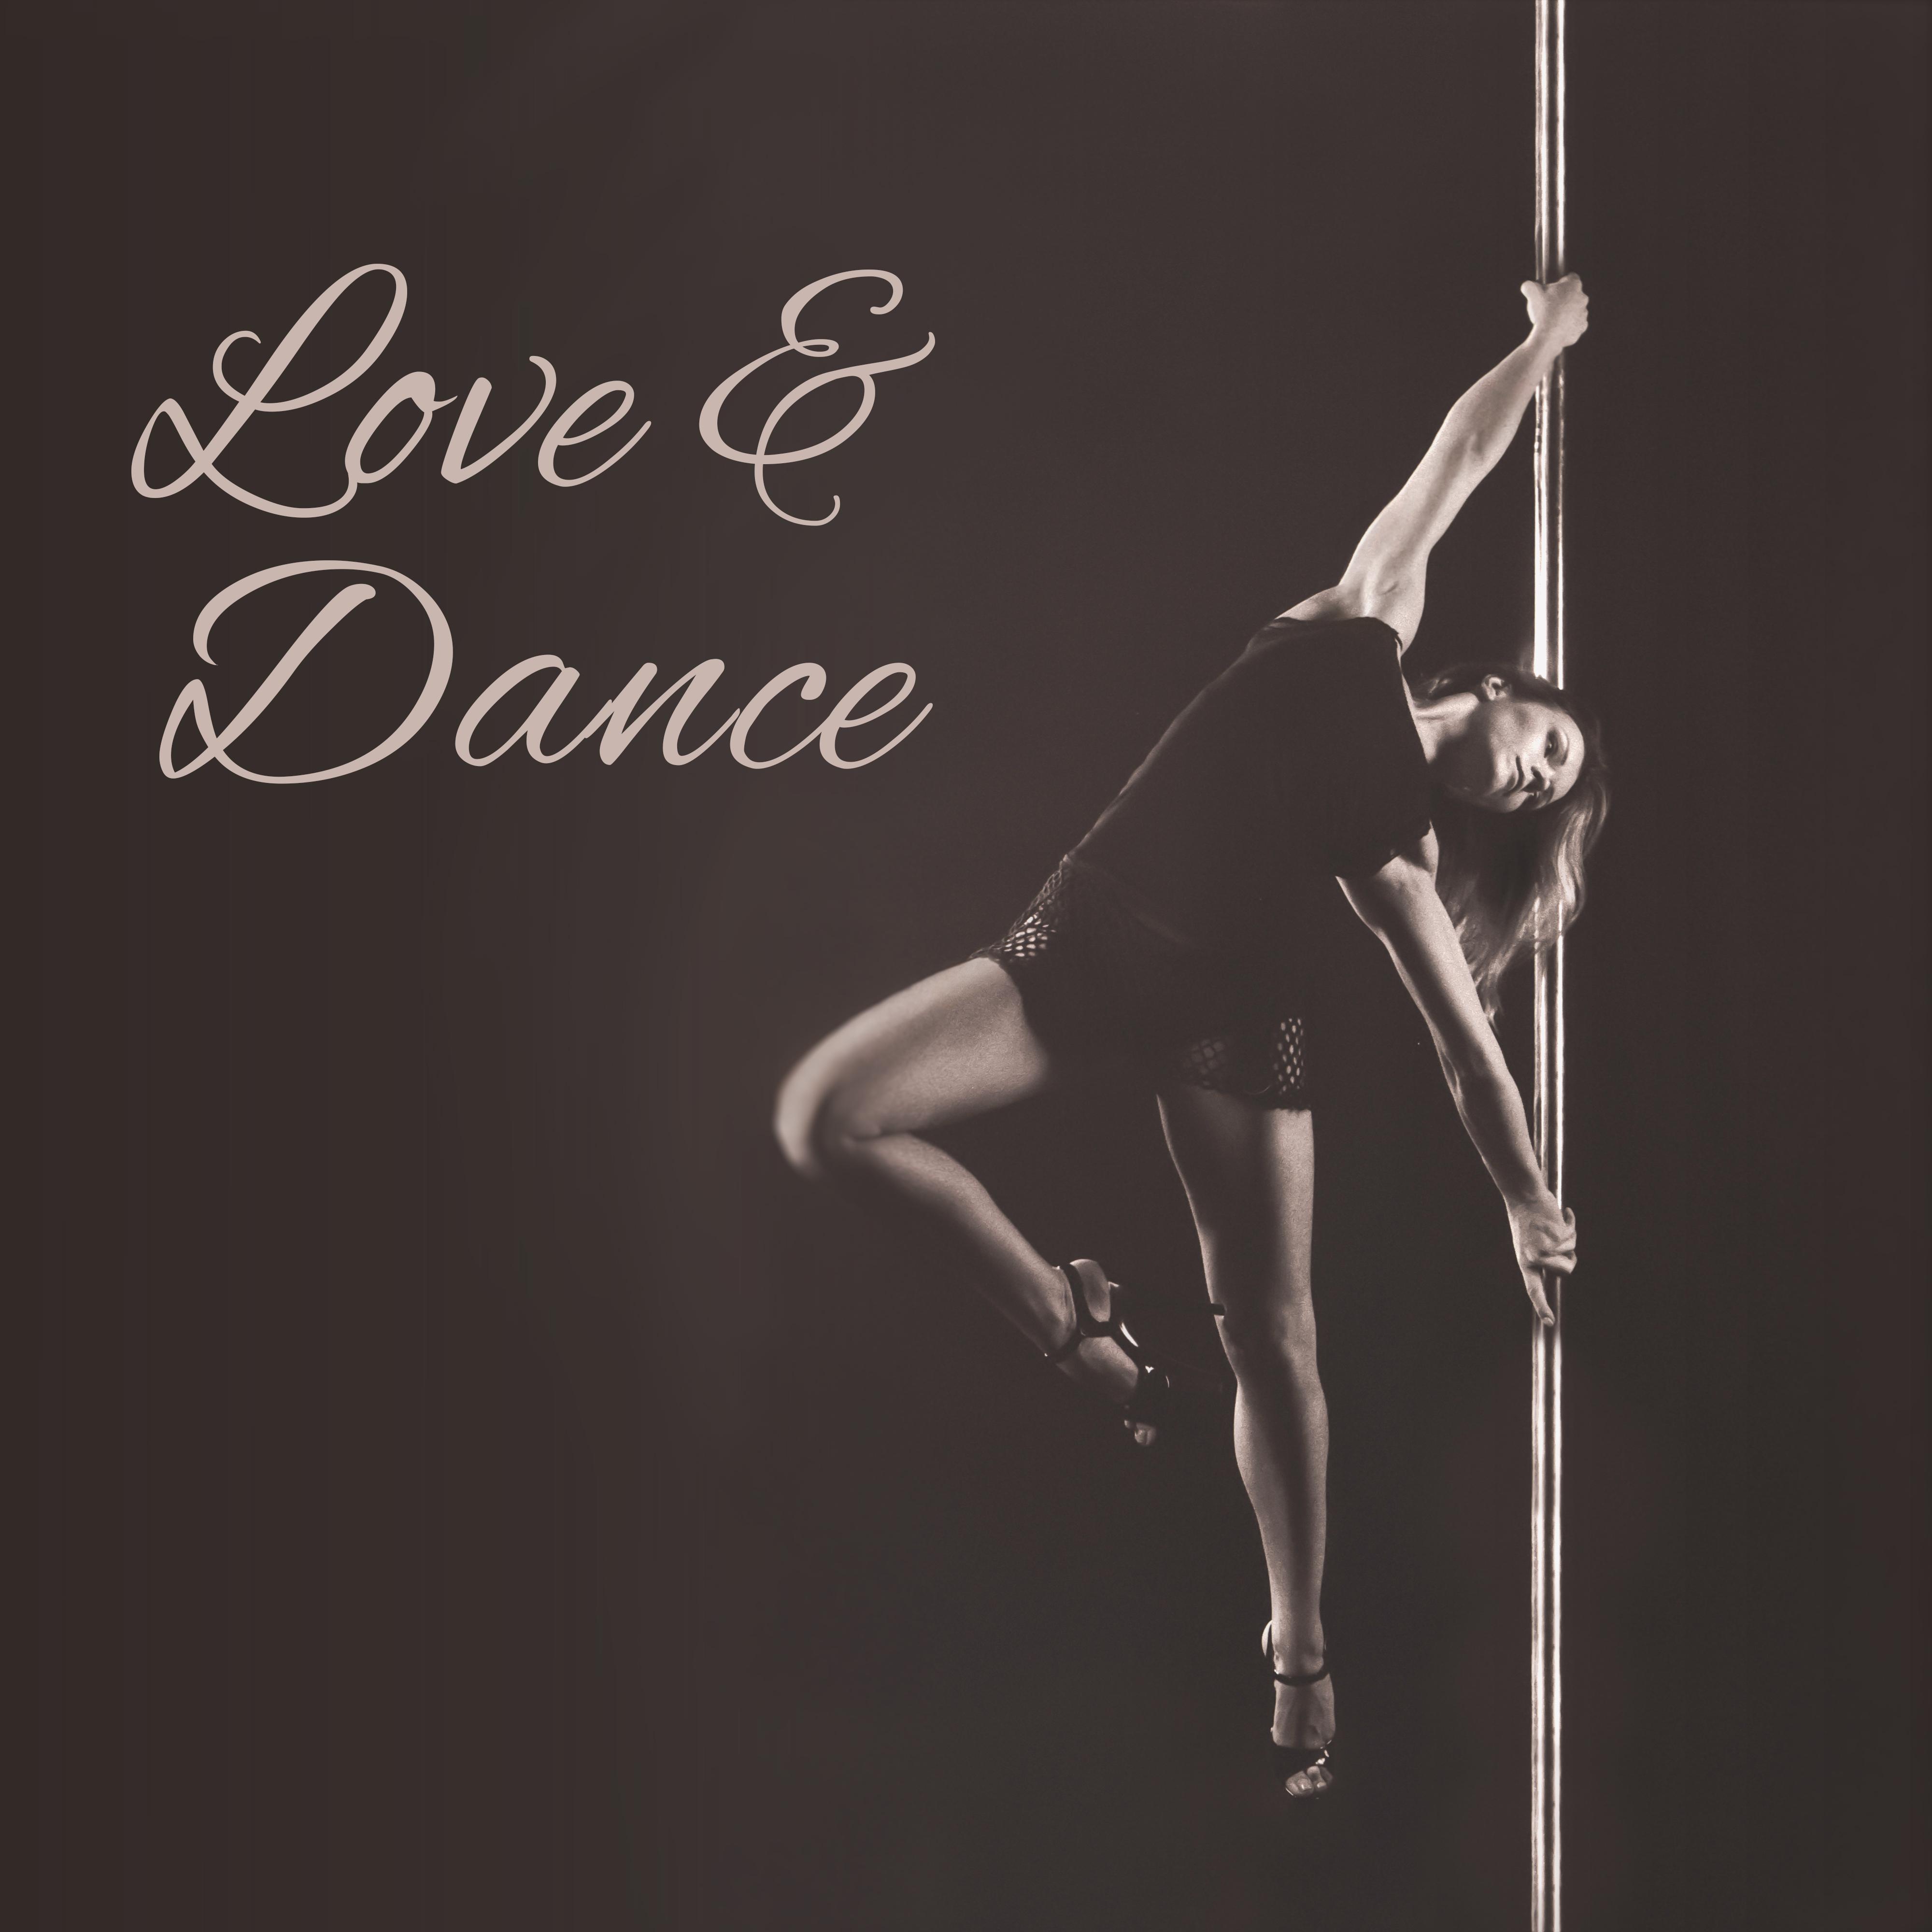 Love & Dance – Sensual Jazz Music, First Kiss, Romantic Time for Two, Smooth Jazz for Lovers, Sensitive Touch, Erotic Lounge